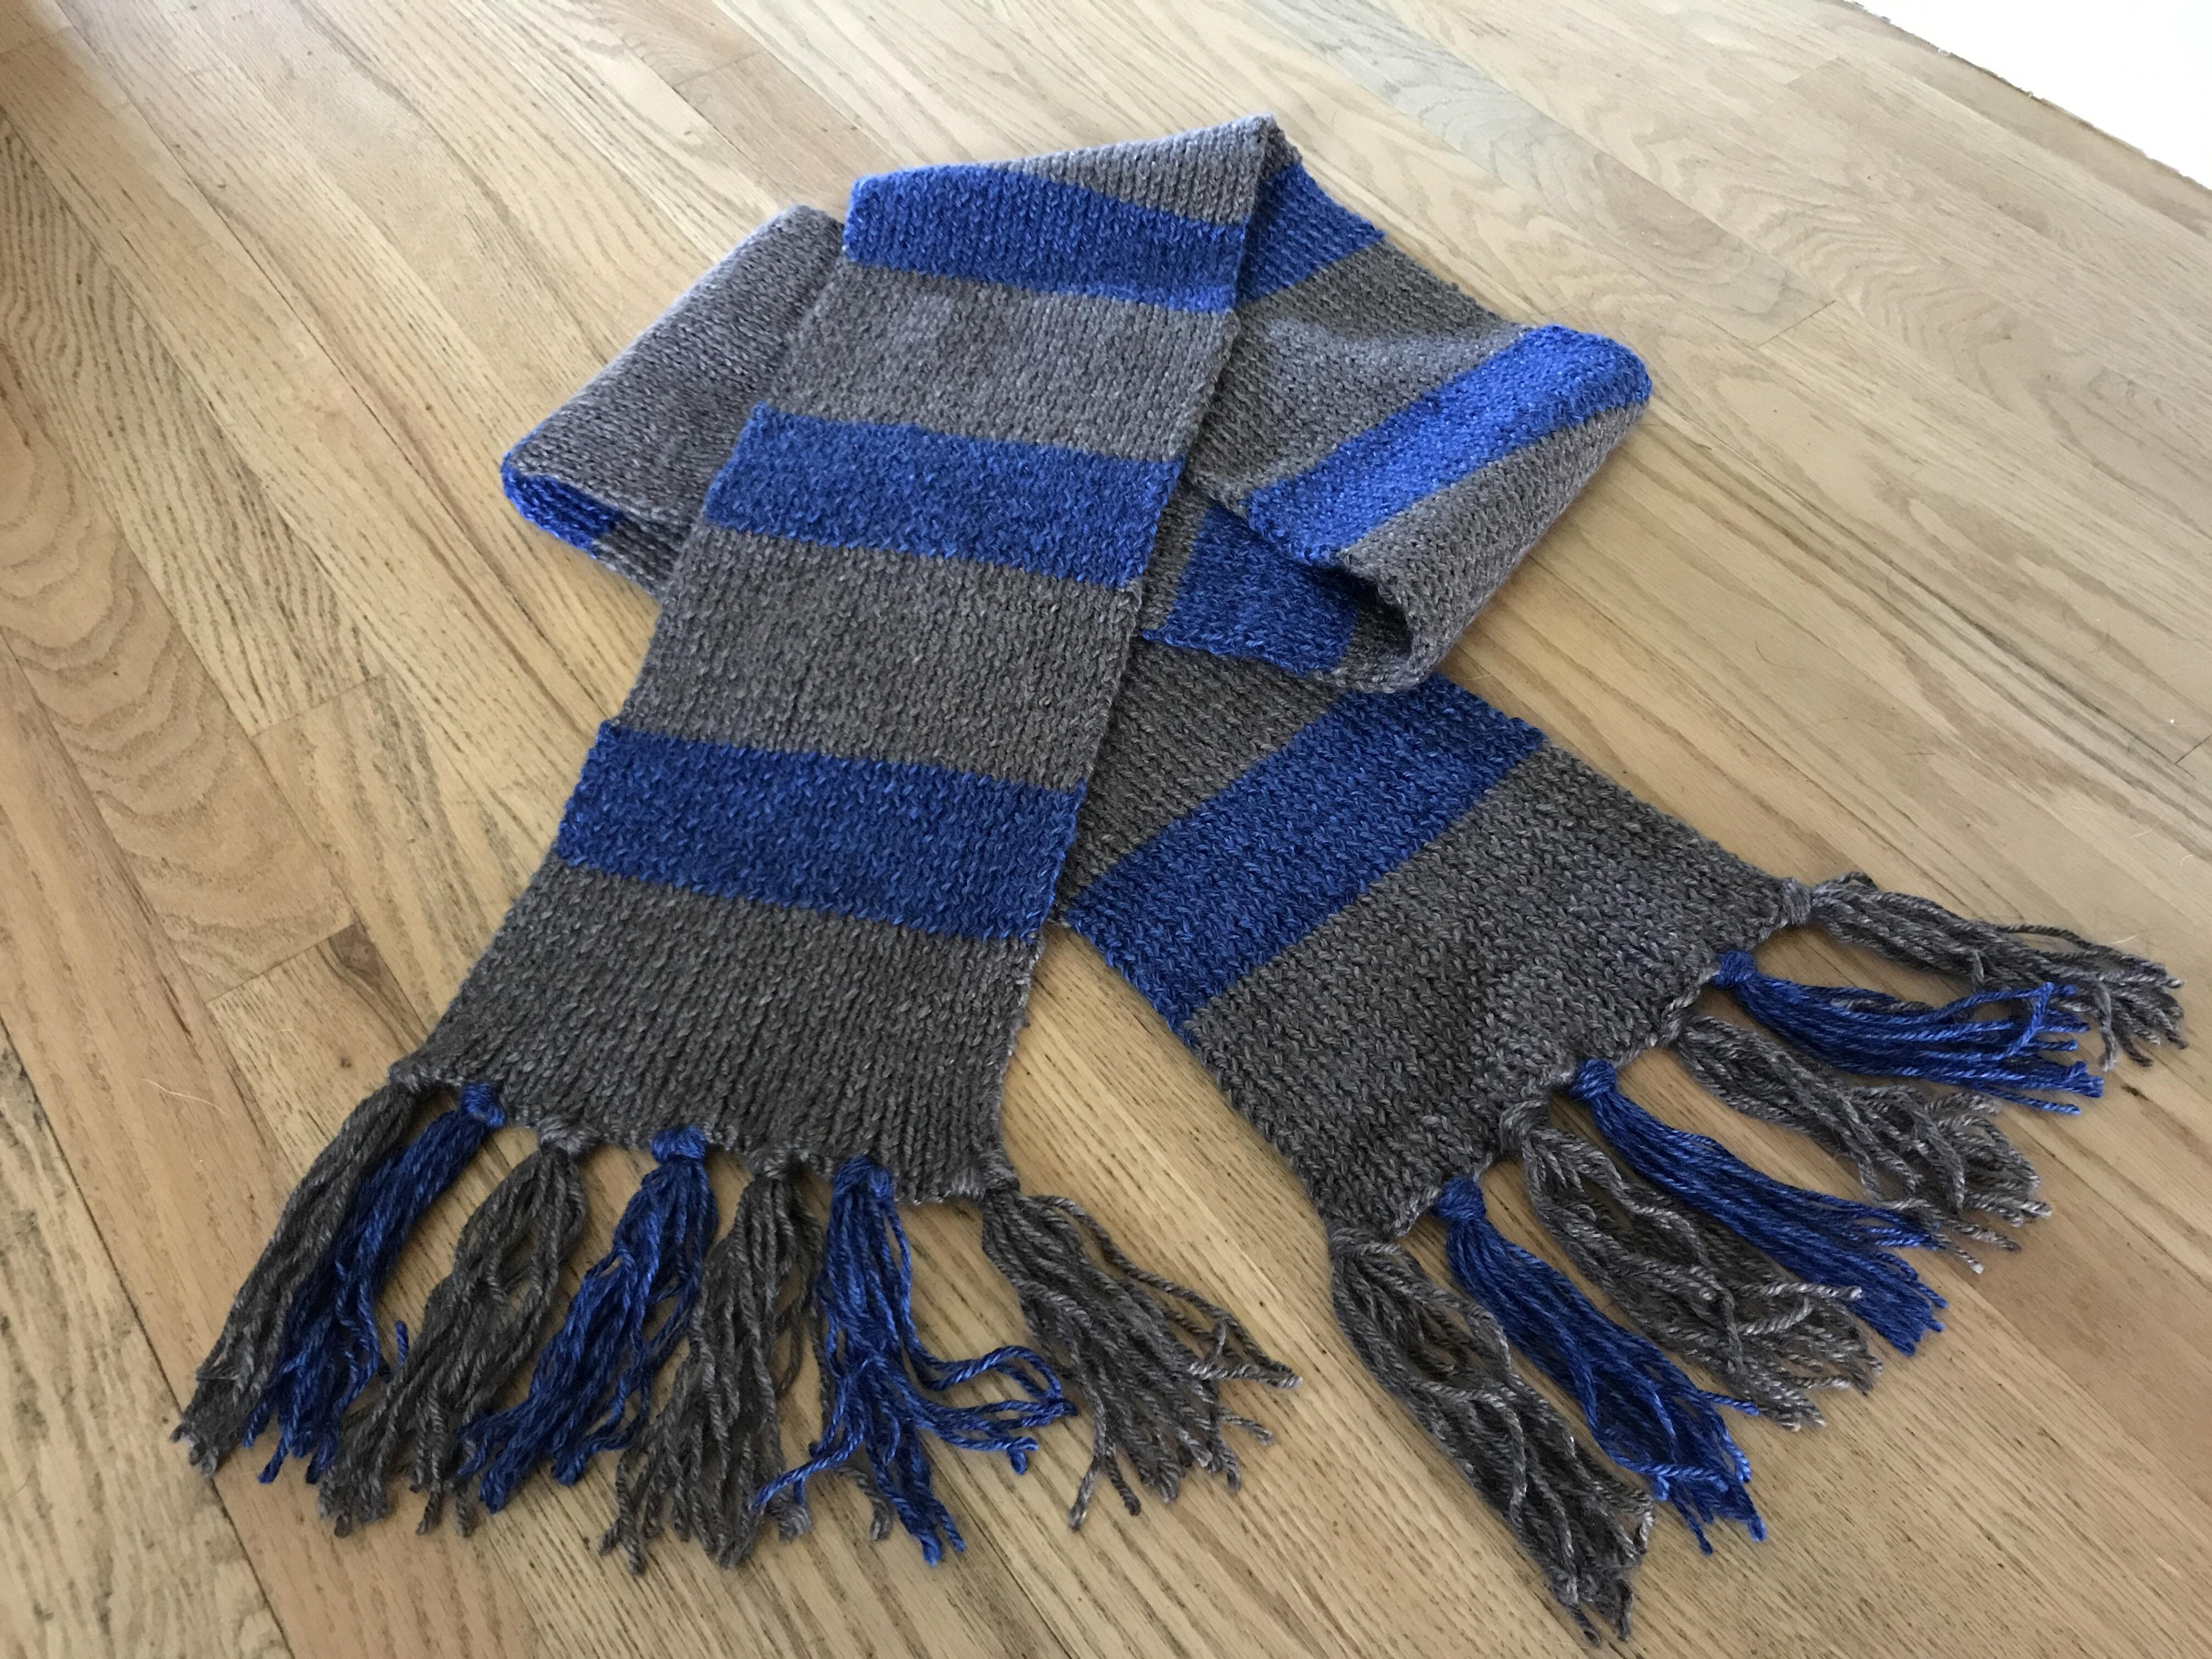 Hogwarts House Scarf Knitting Pattern Fo Ravenclaw Scarf Inspired Fantastic Beasts Made One For